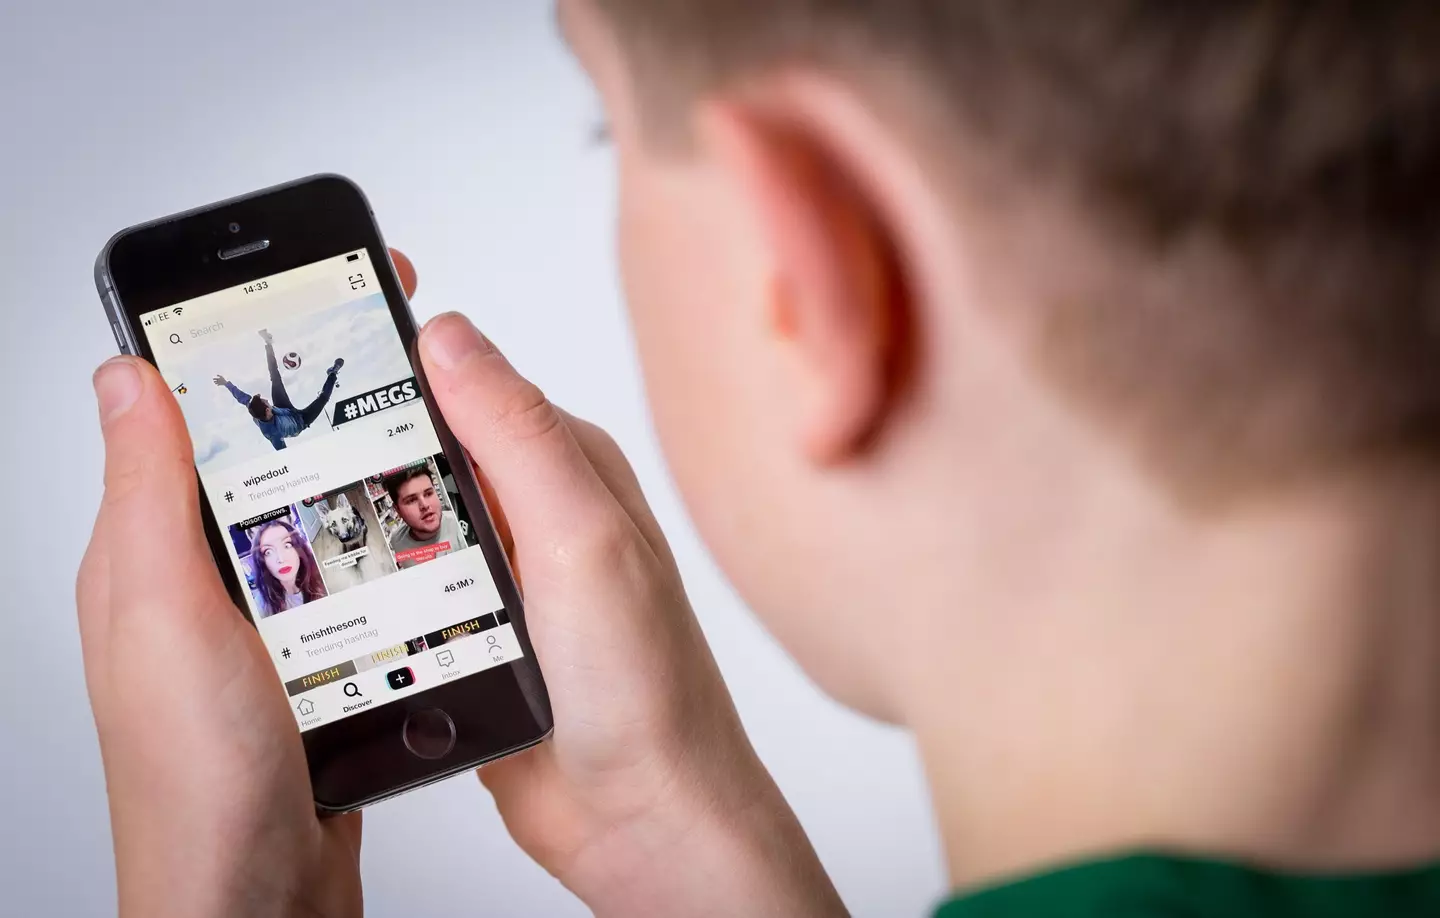 Under-18s will no longer be able to scroll TikTok for hours on end.